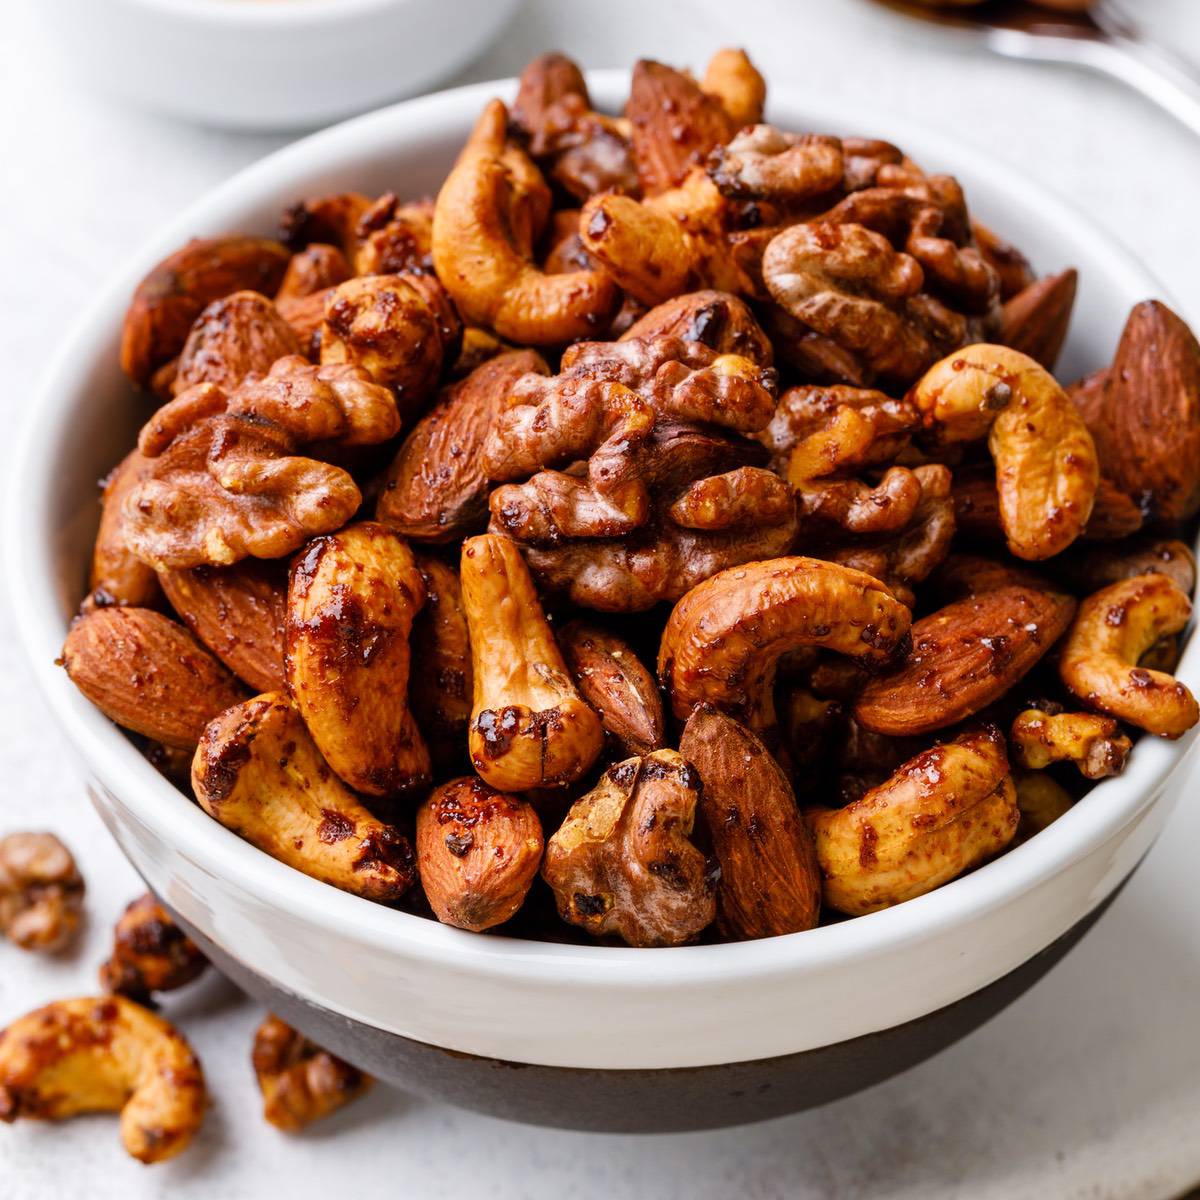 The Best Way to Roast Nuts